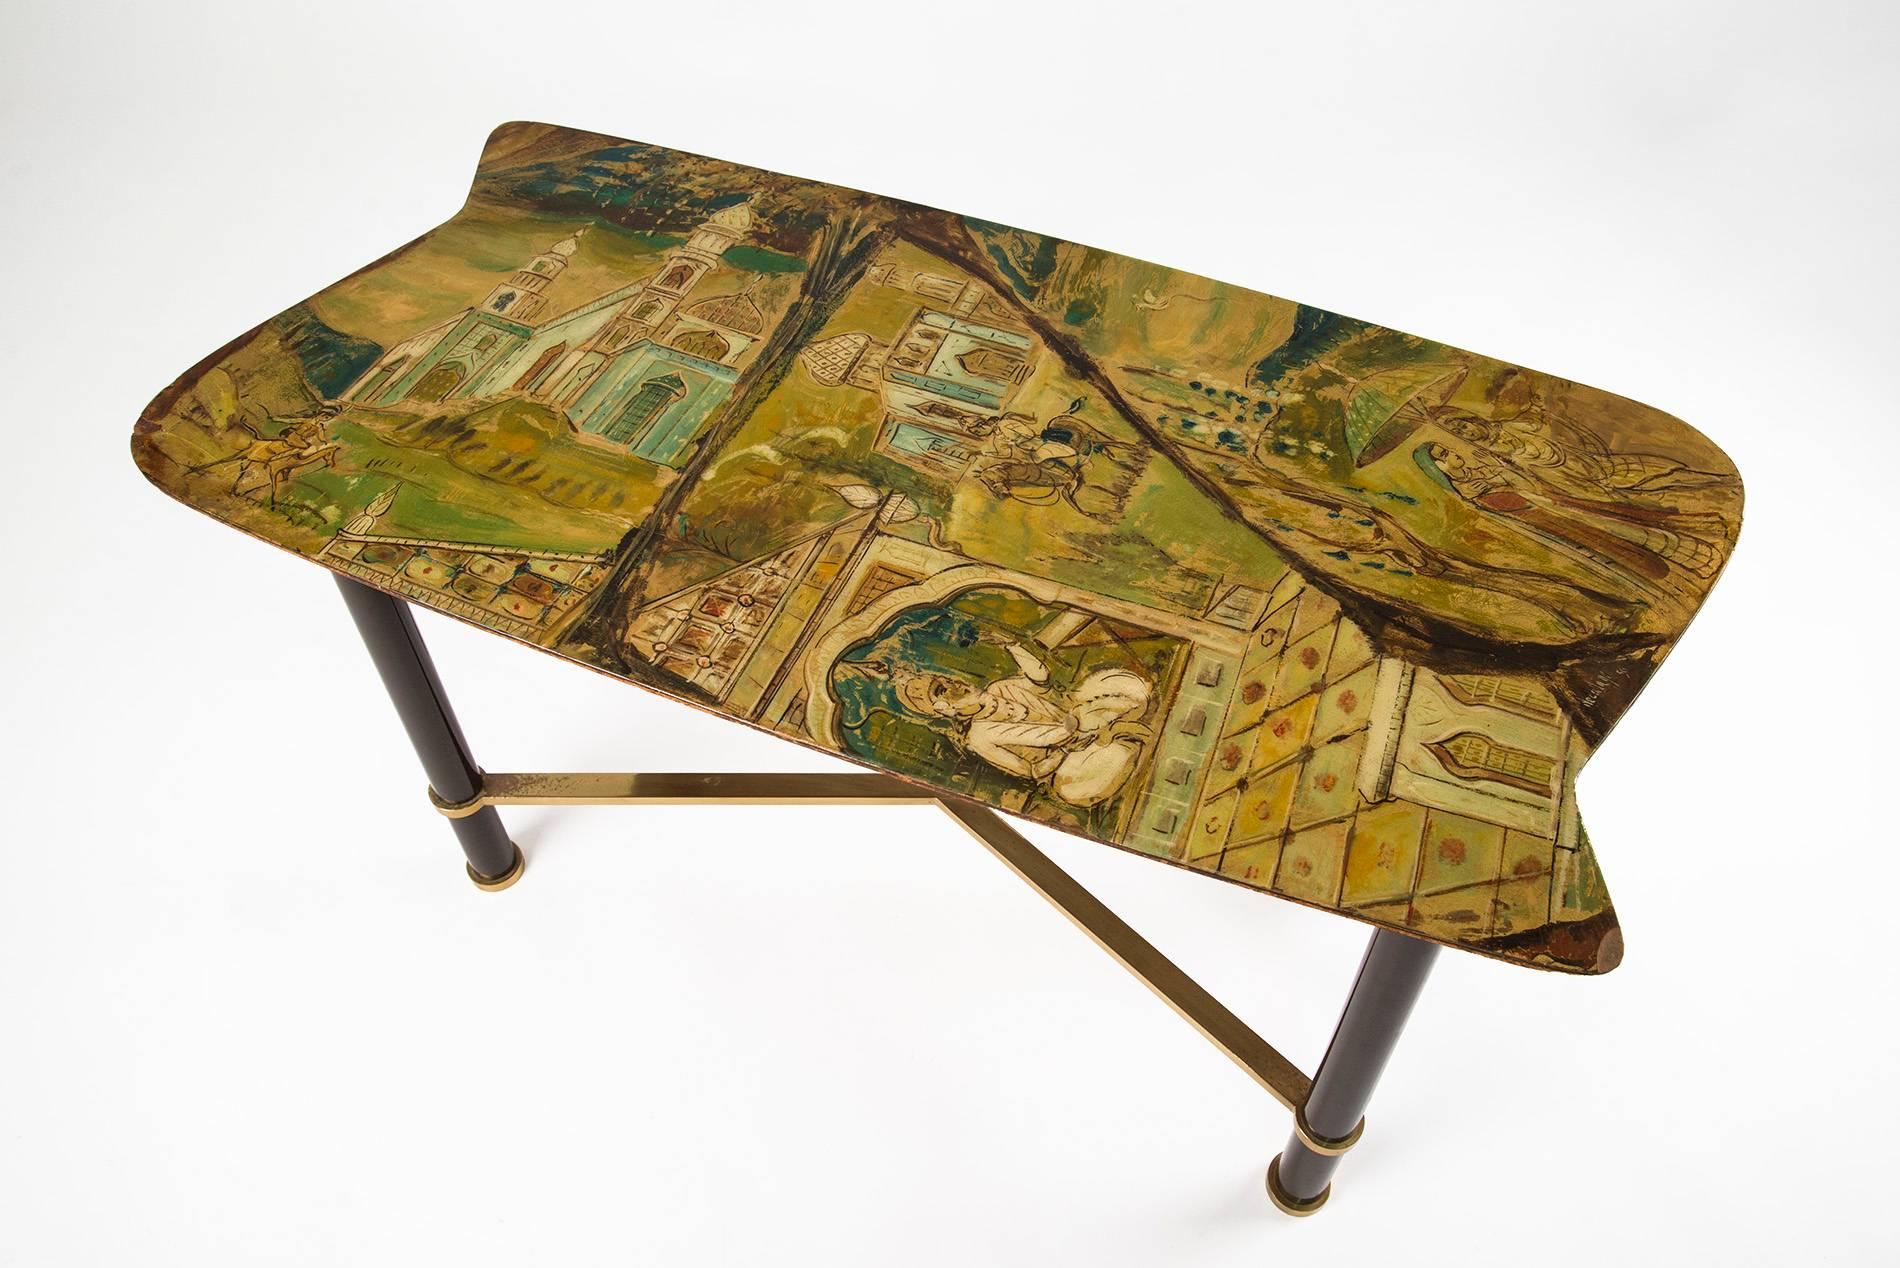 Extraordinary low table designed by Gruppo Decalage (De'Cavero, Aloisi, Girardi), manufactured in Turin in 1956. Black lacquered metal legs, brass feet and crossing beams, exquisitely hand-painted wooden top covered with a resin protective lacquer.